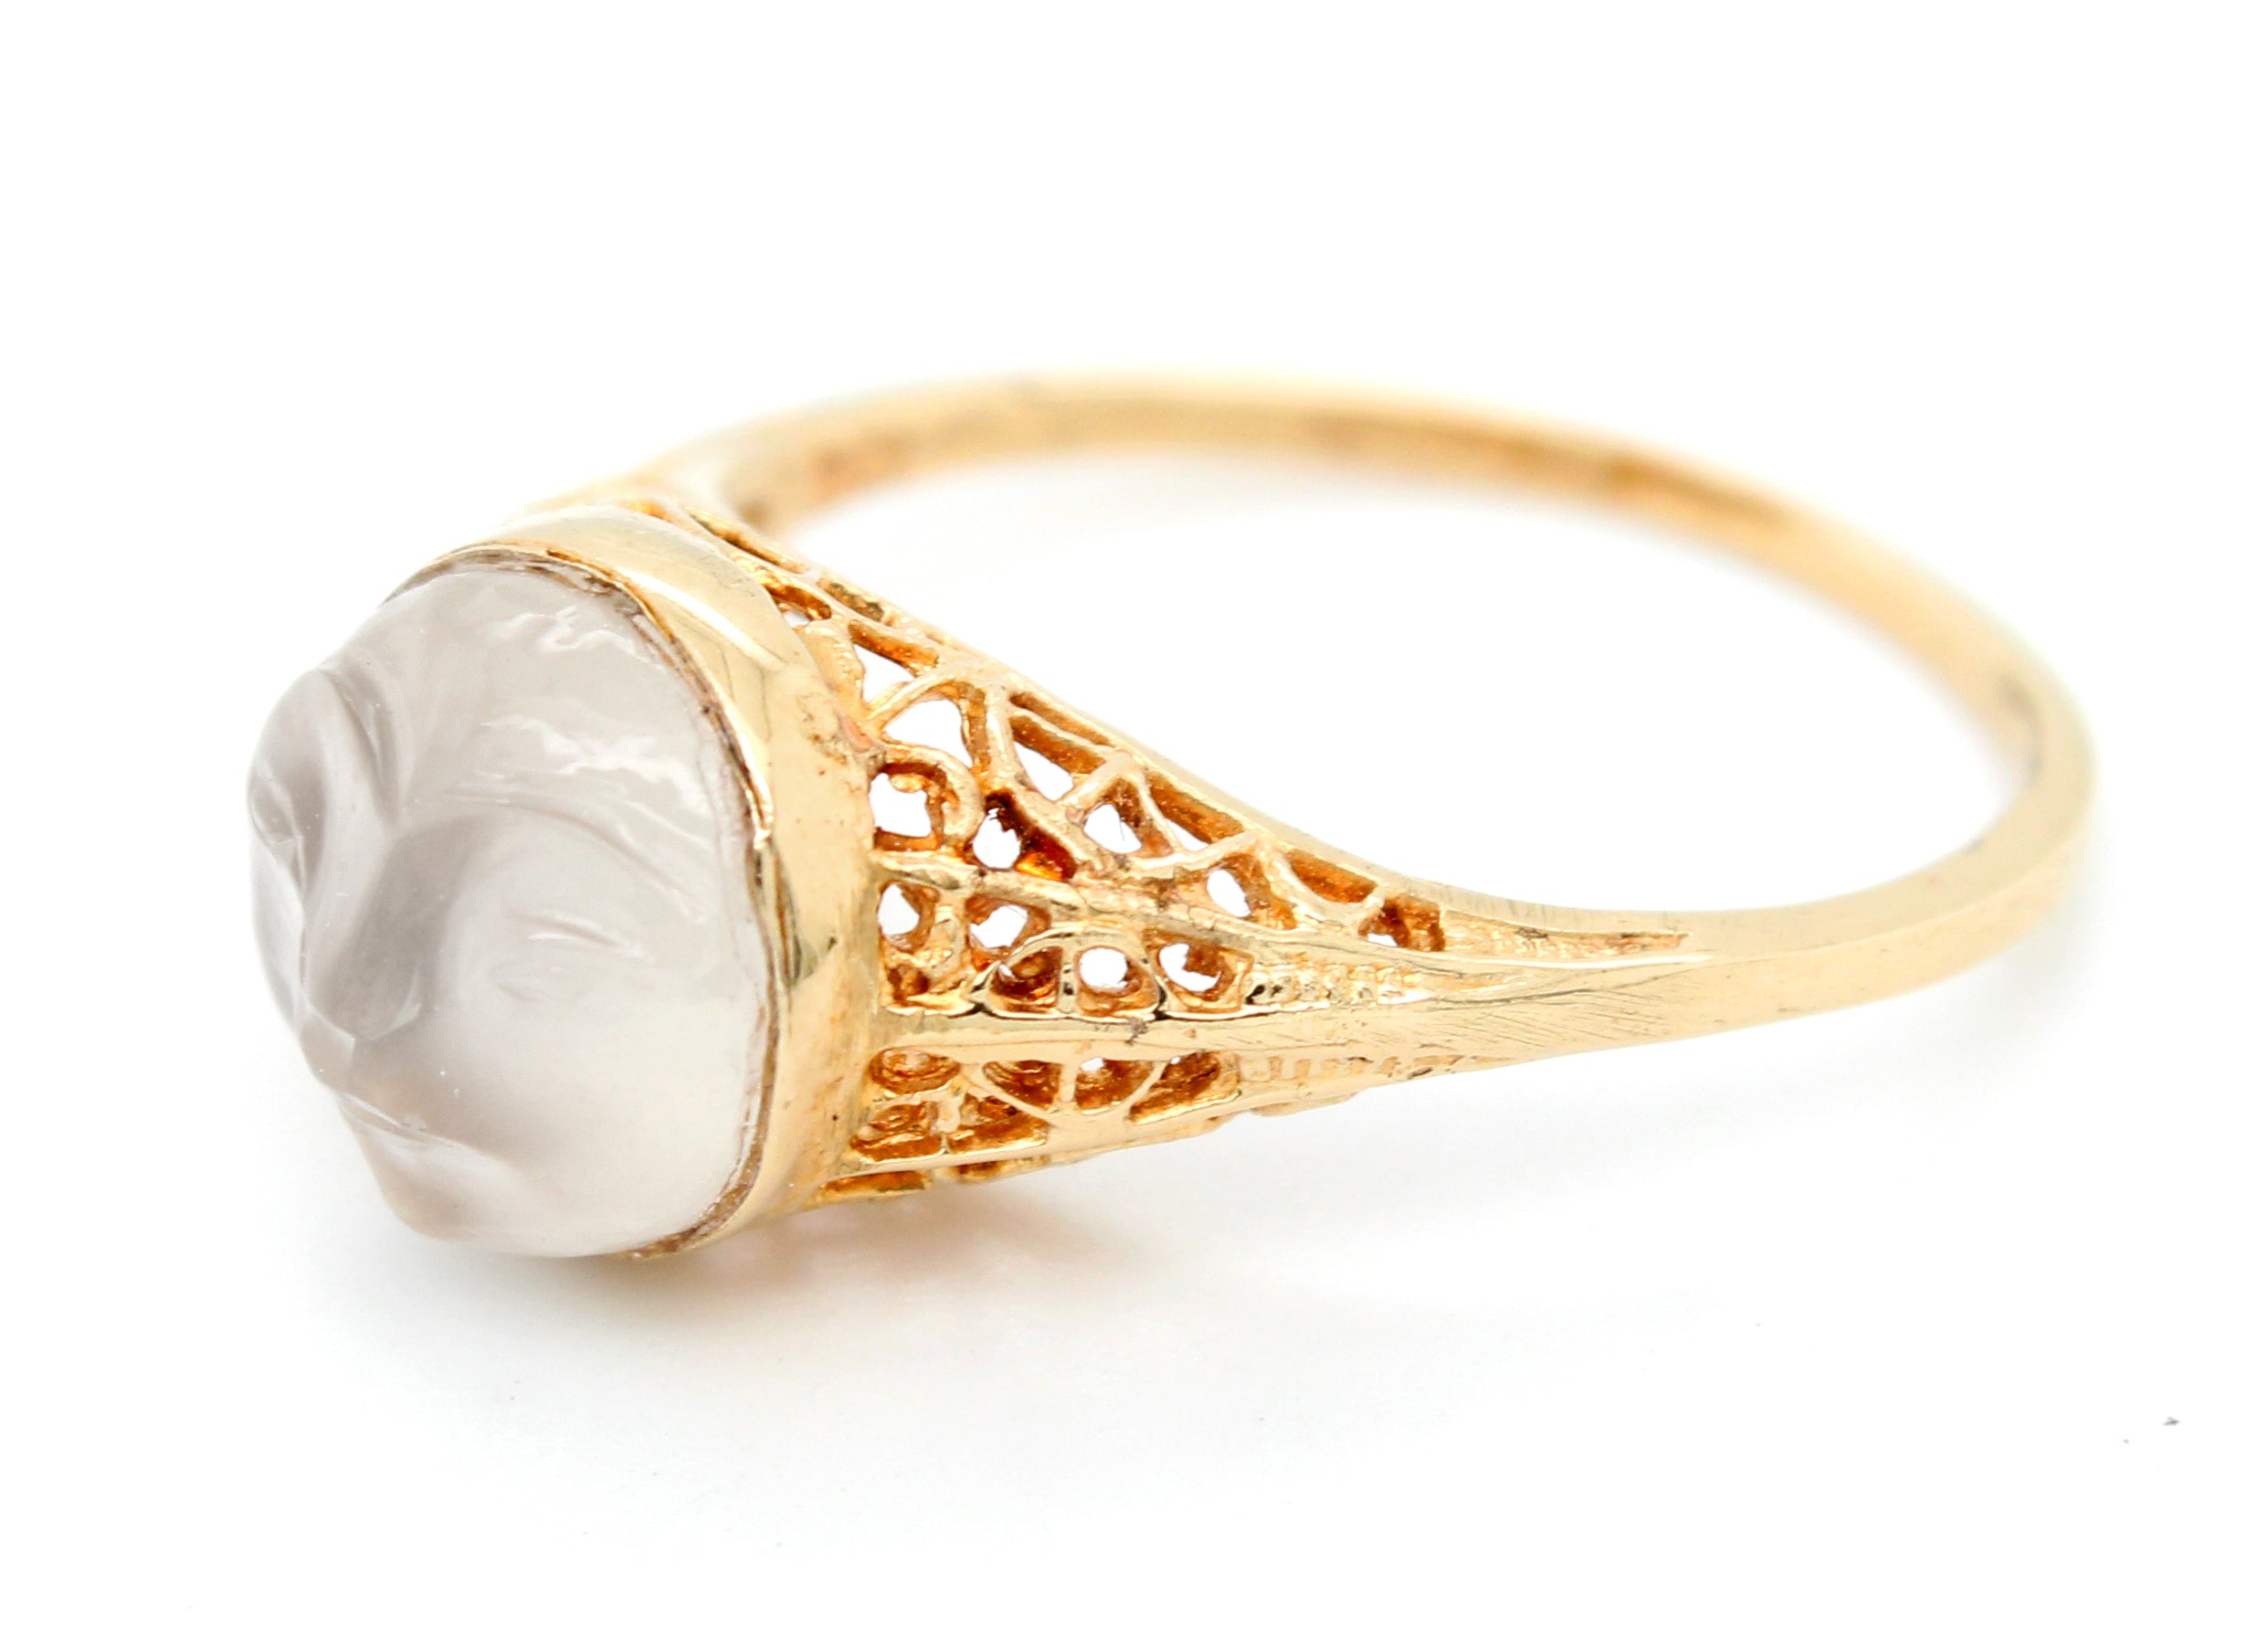 Vintage 2.25ct Moonstone Face Ring in 18k Yellow Gold - Size 6.75